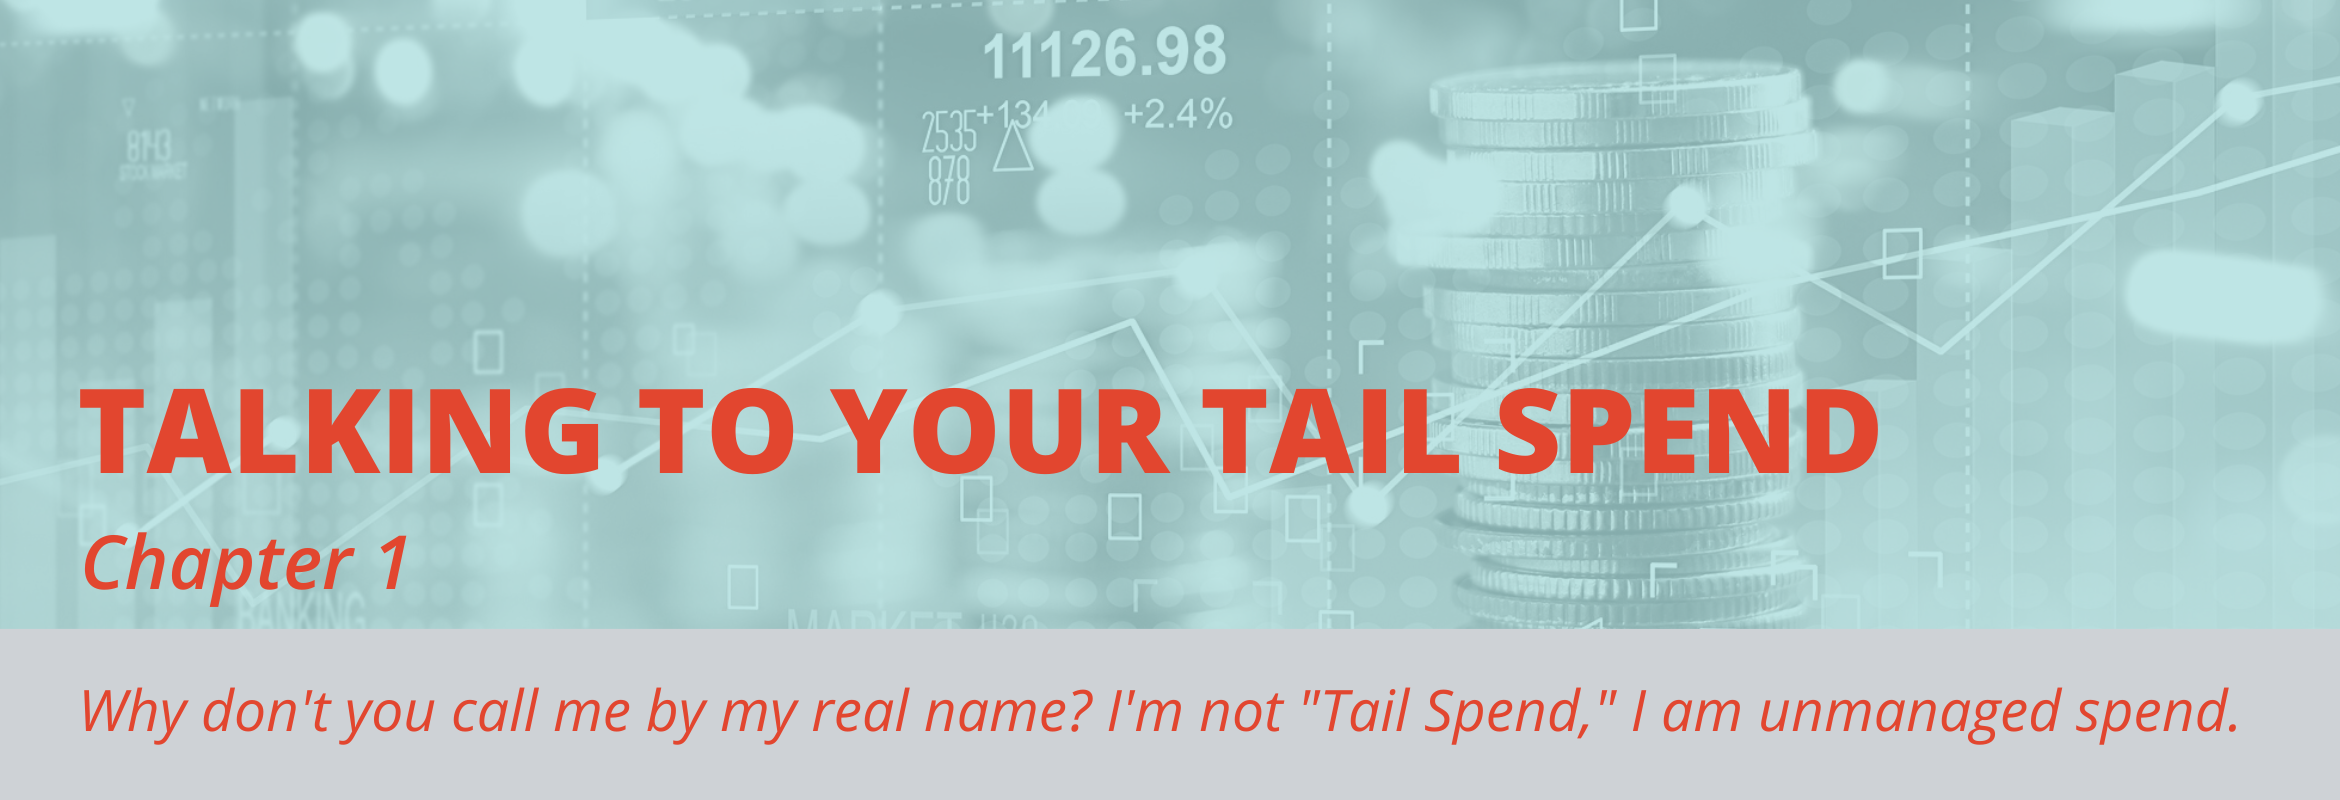 In this blog post, tail spend is defined as unmanaged spend.